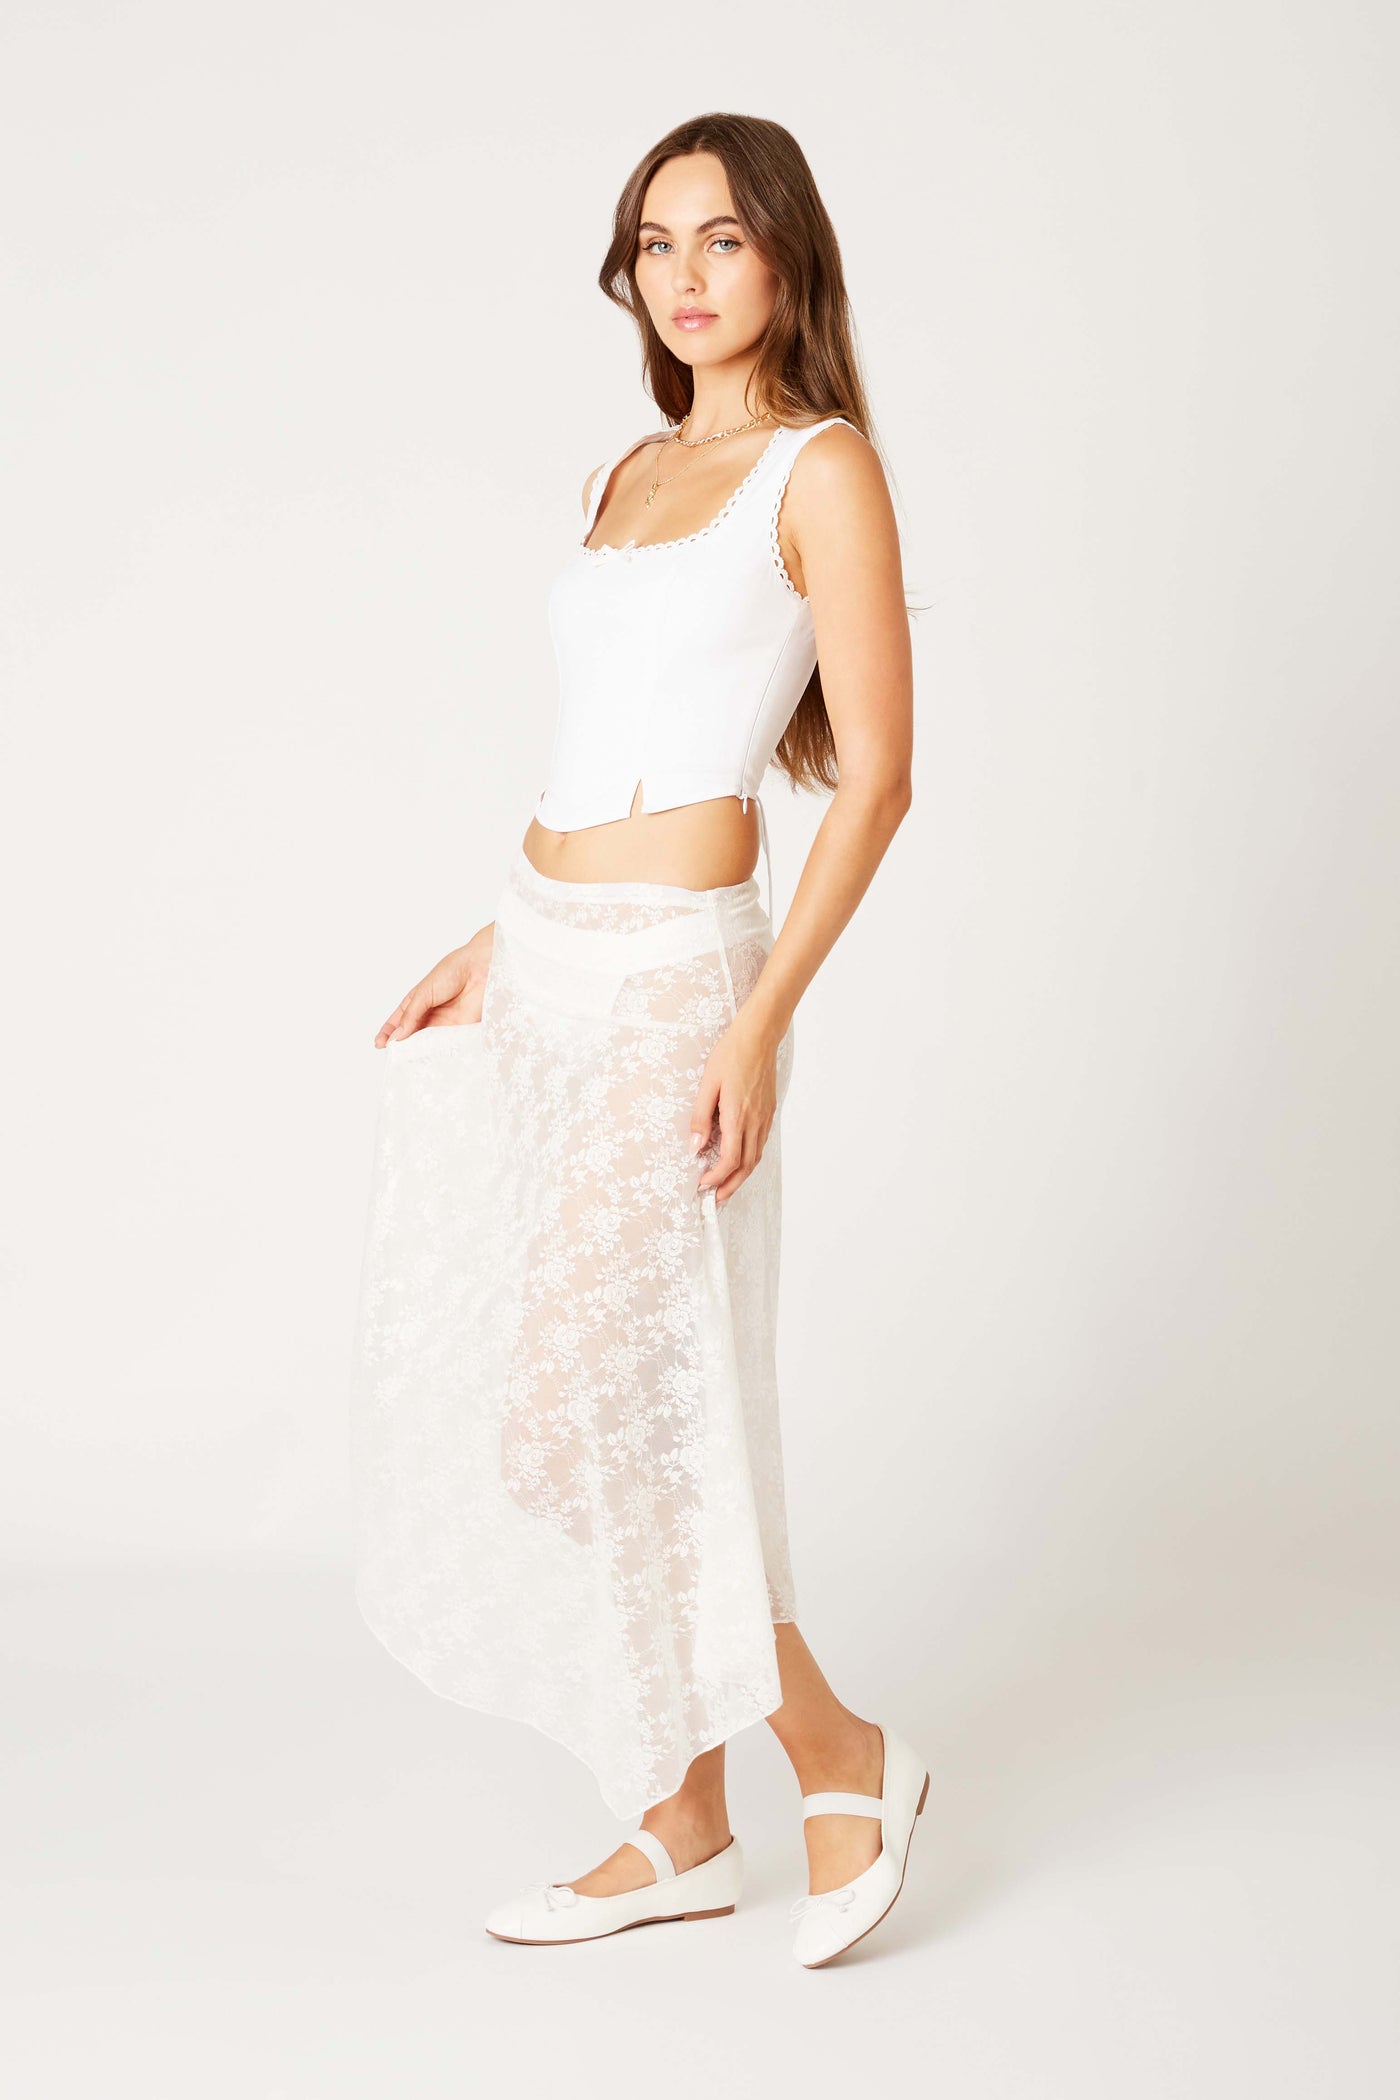 Seaside Dream Lace Skirt by 75